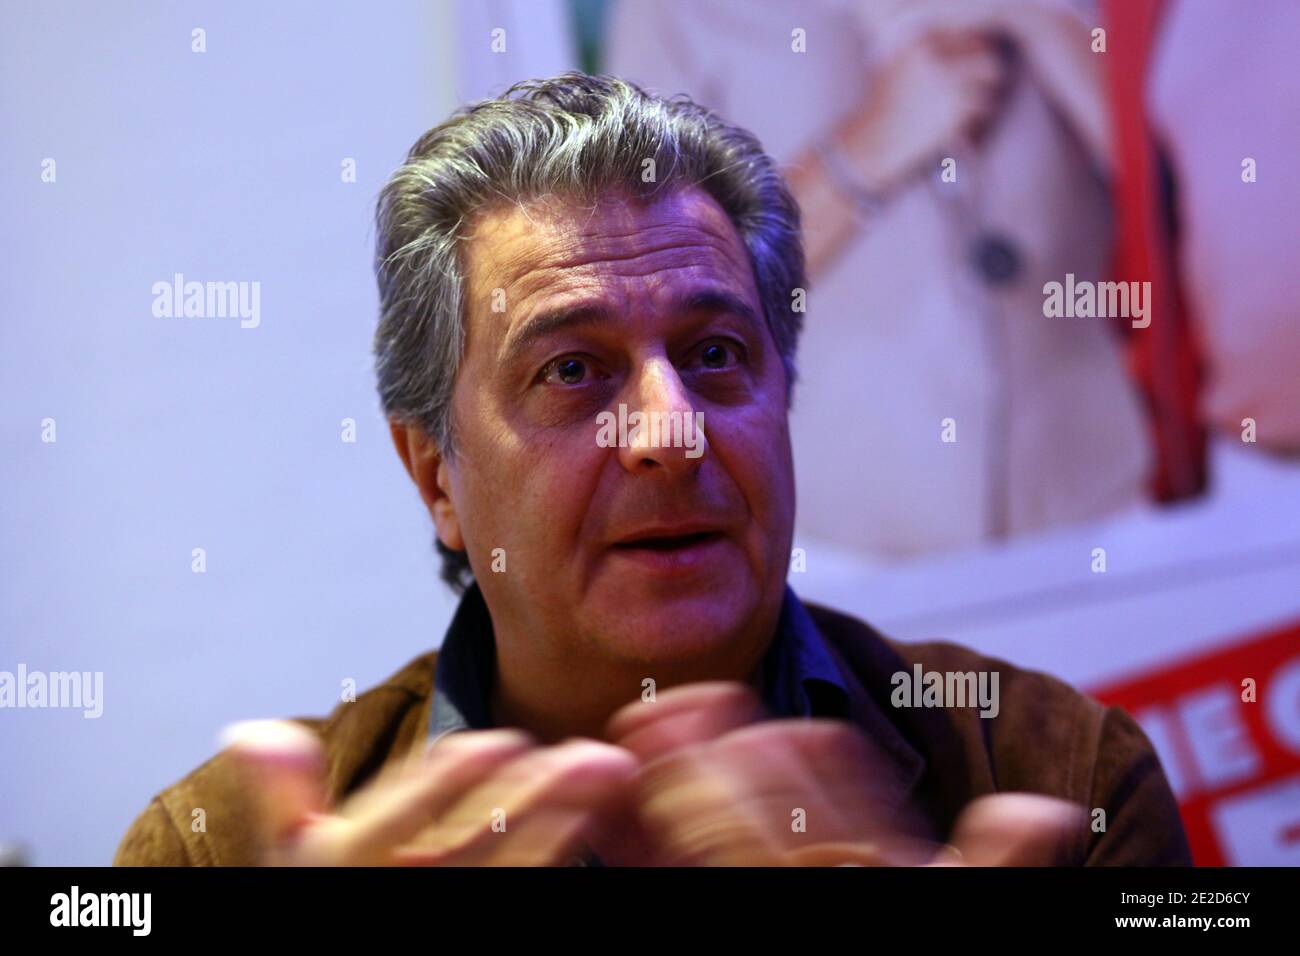 French director/actor Christian Clavier during a press conference prior to  the screening of new movie 'On ne choisit pas sa famille', in Lille,  northern France on October 26, 2011. Photo by Sylvain